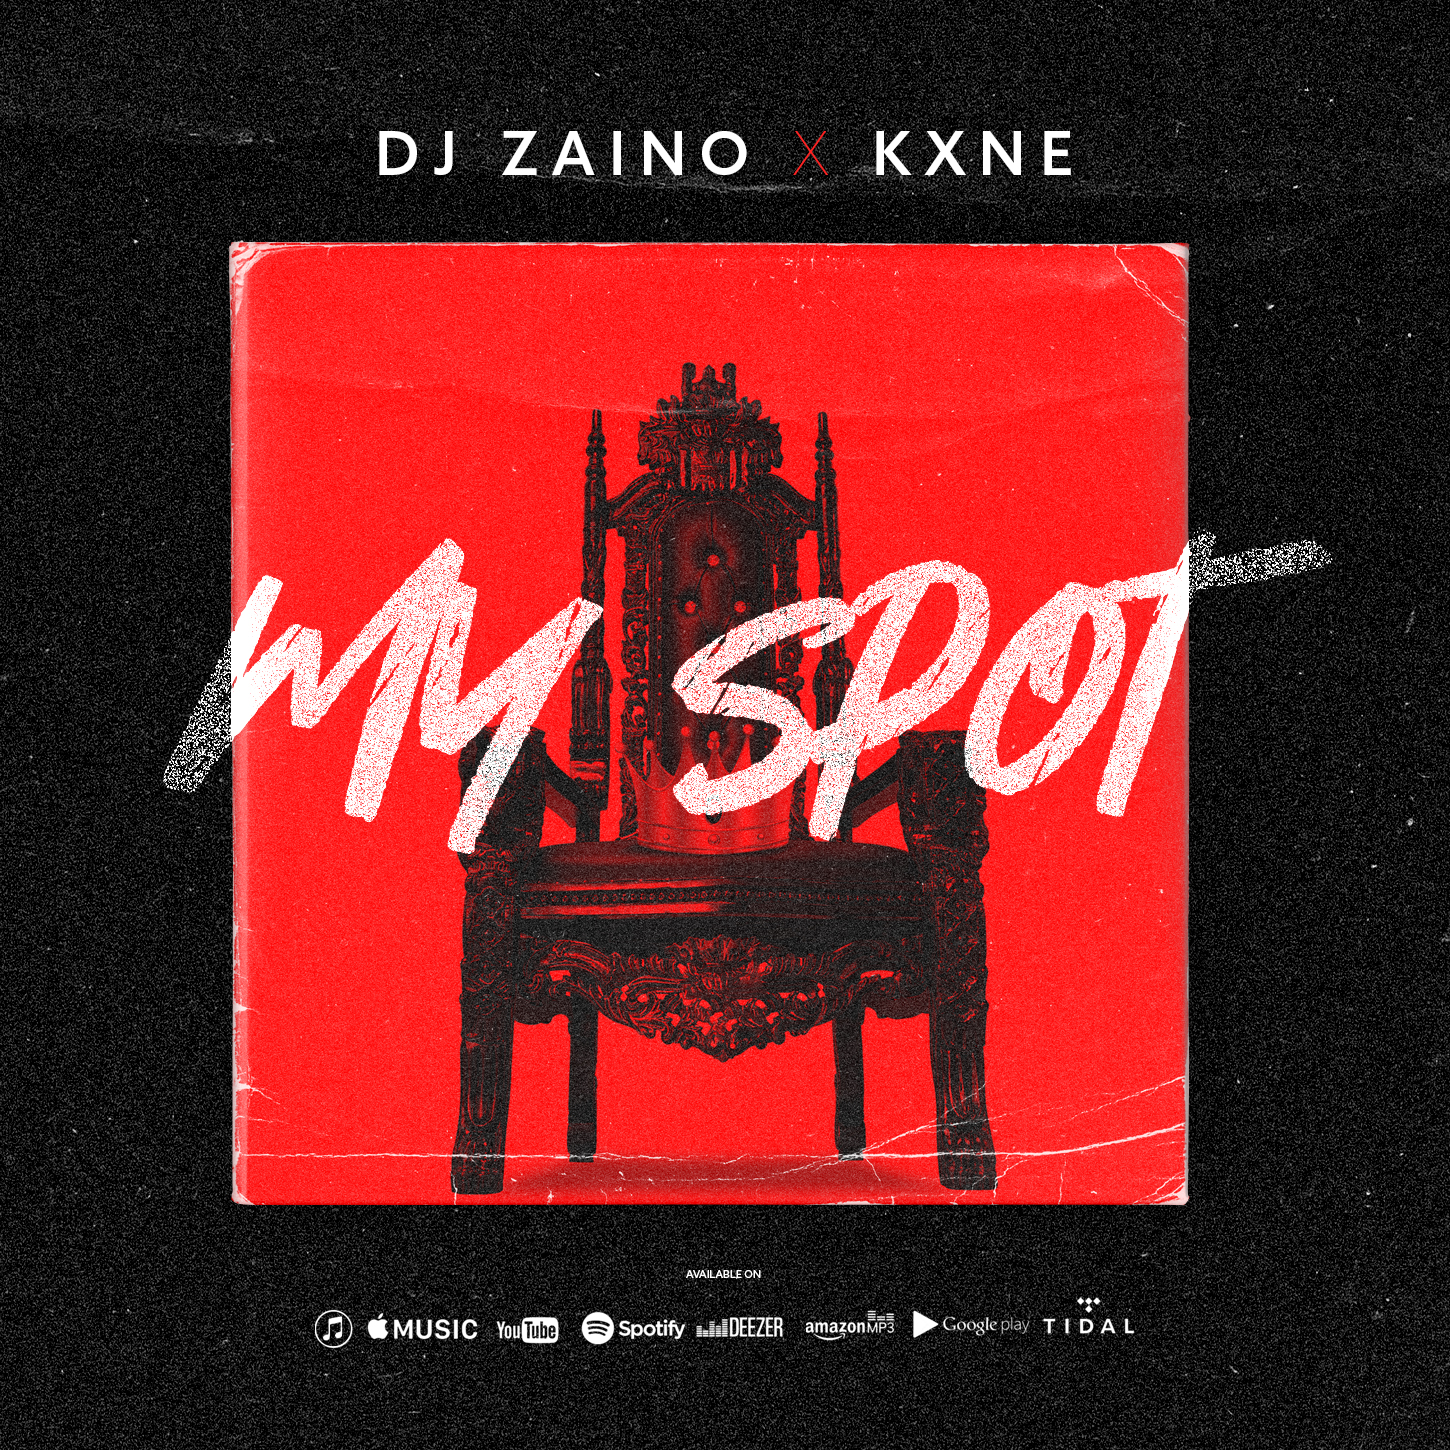 DJ ZAINO x KXNE: My Spot feat KXNE is Officially Out on all Music Platforms